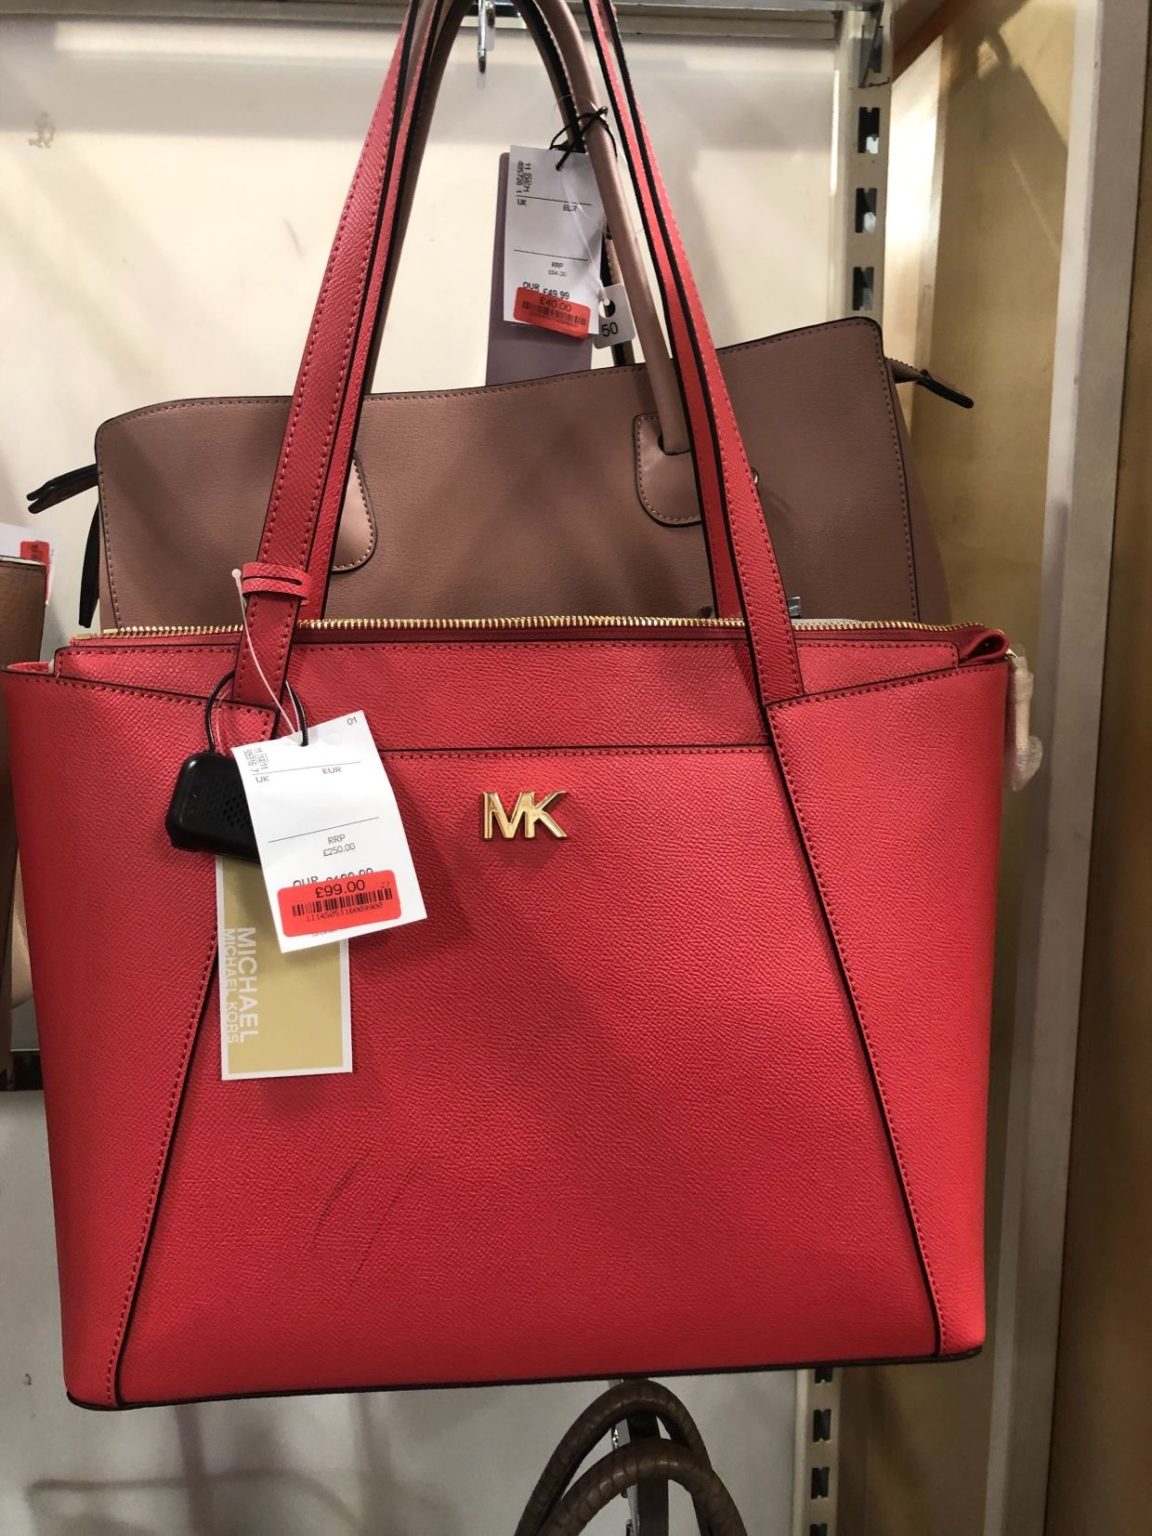 TK Maxx Selling Michael Kors And DKNY Bags For 70% Off! • Page 4 of 5